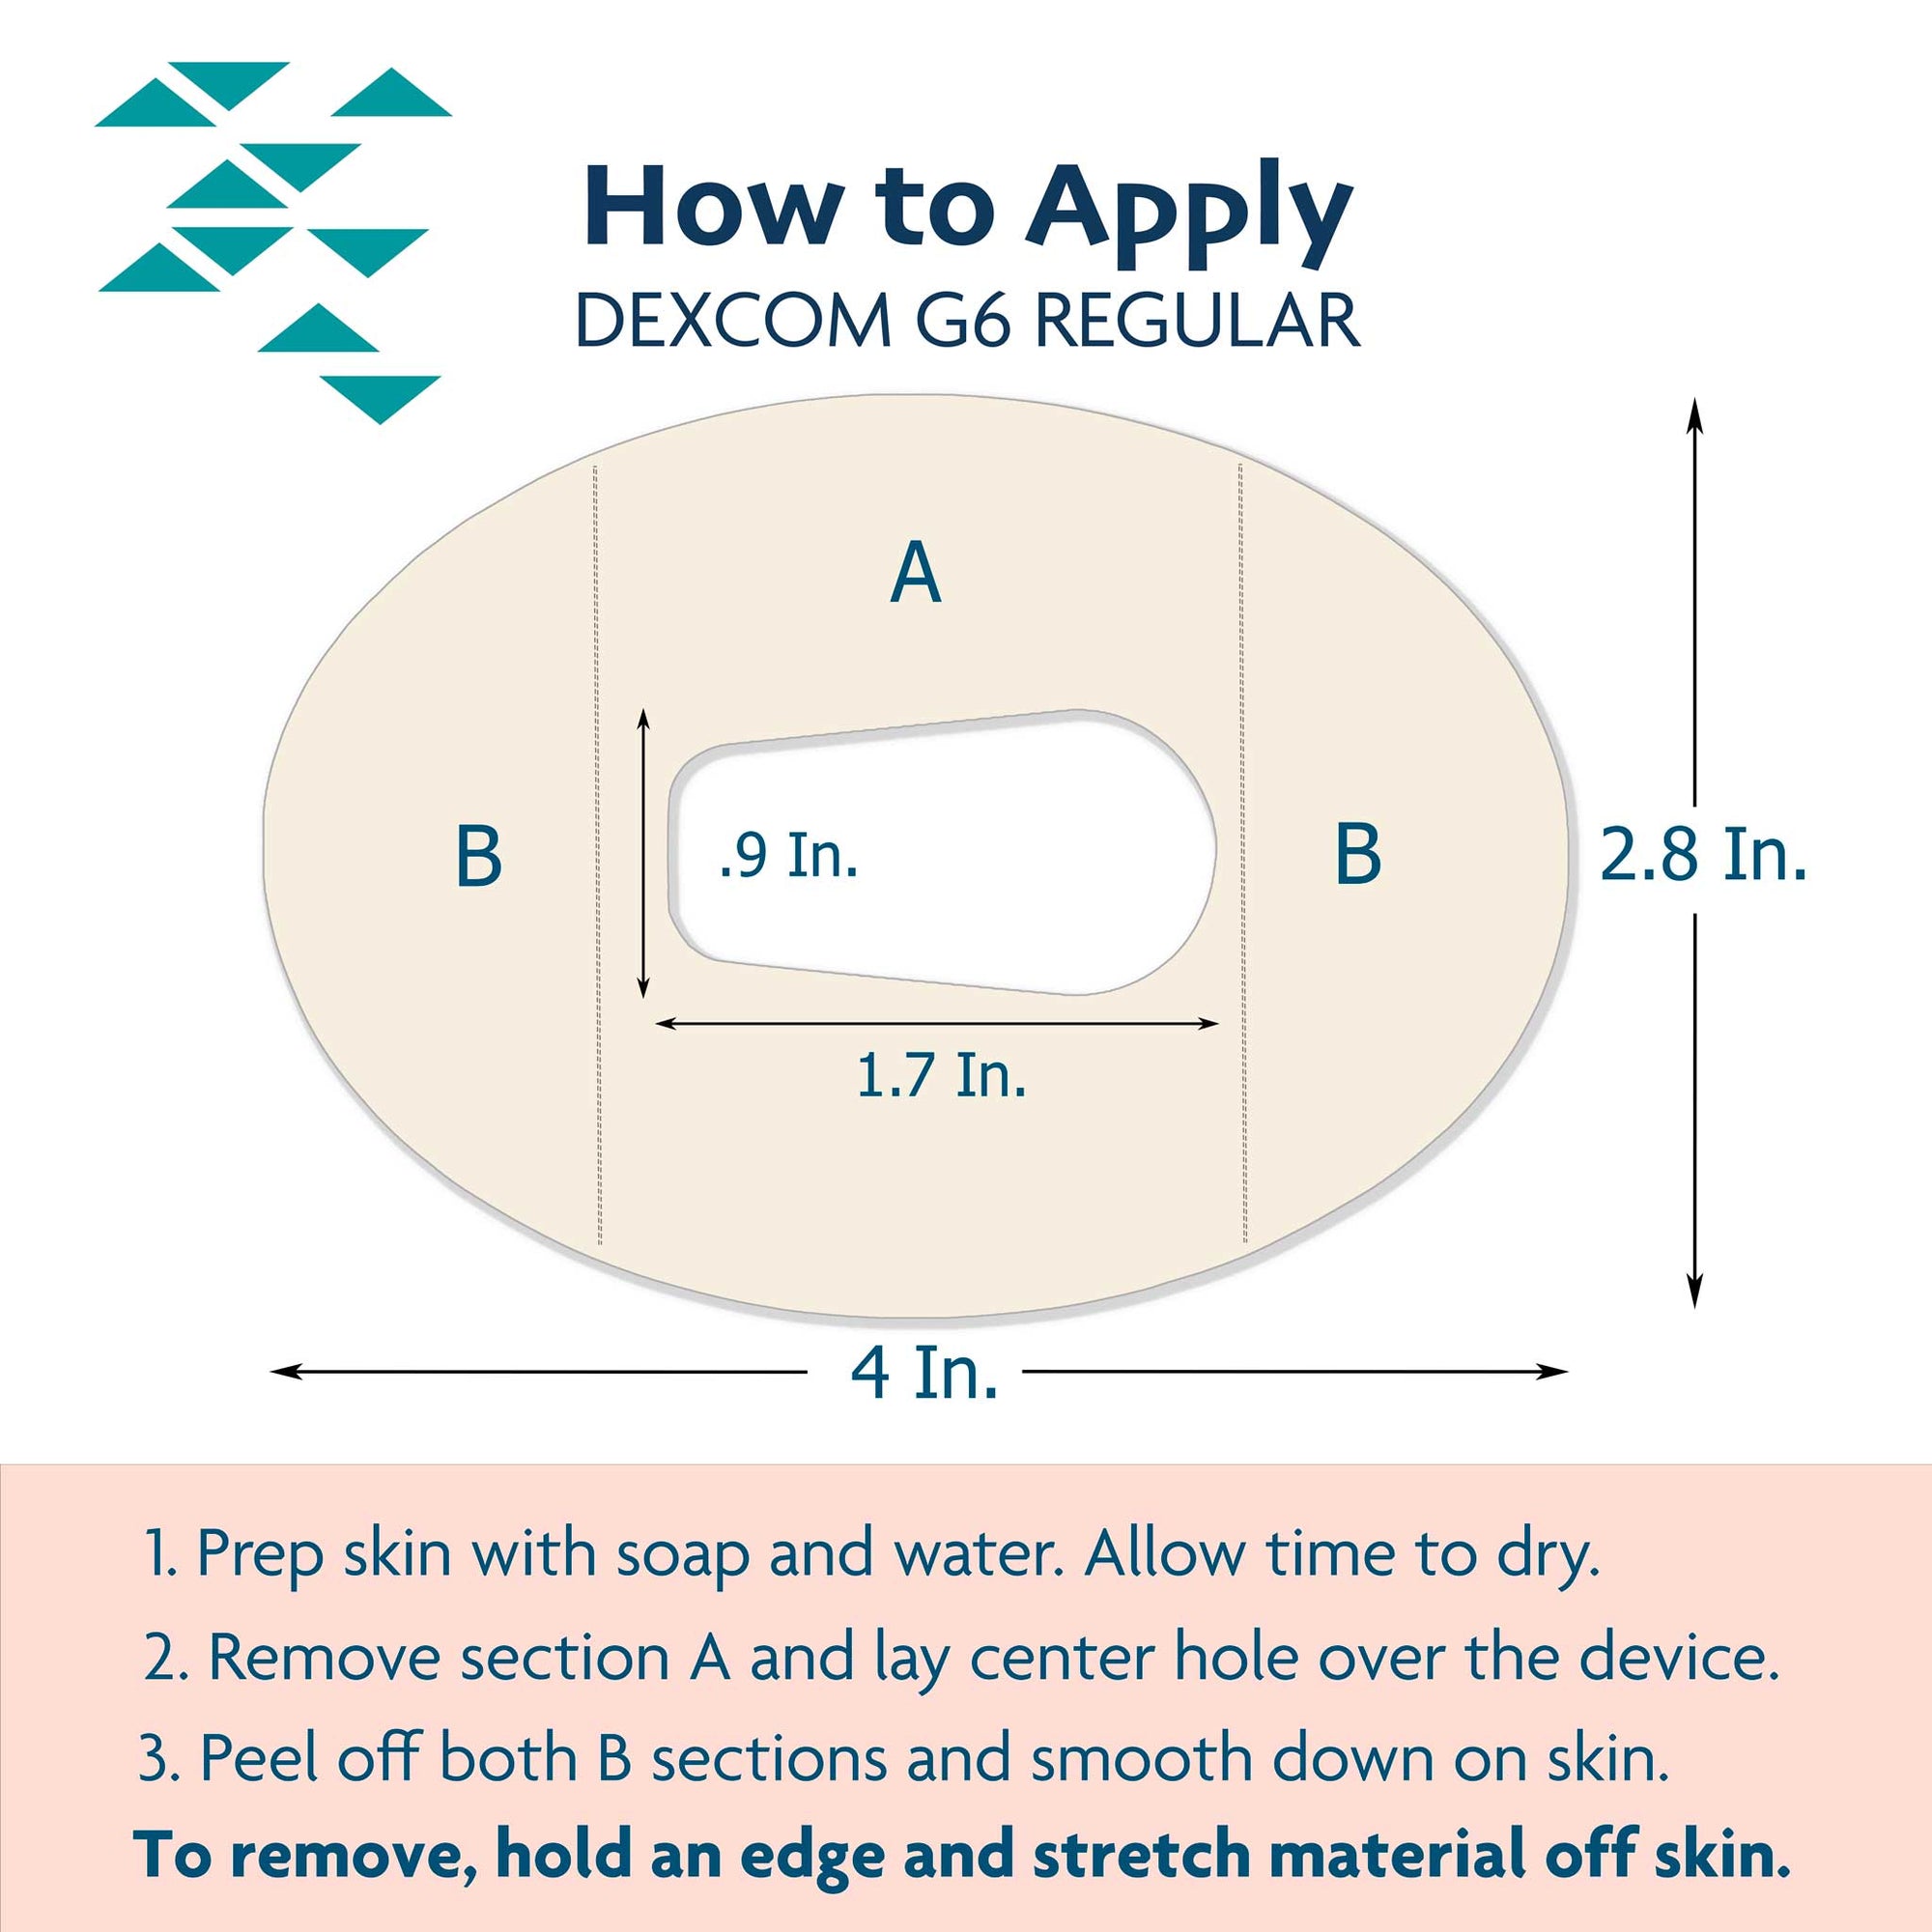 Guide to secure Dexcom Device using G6 CGM adhesives